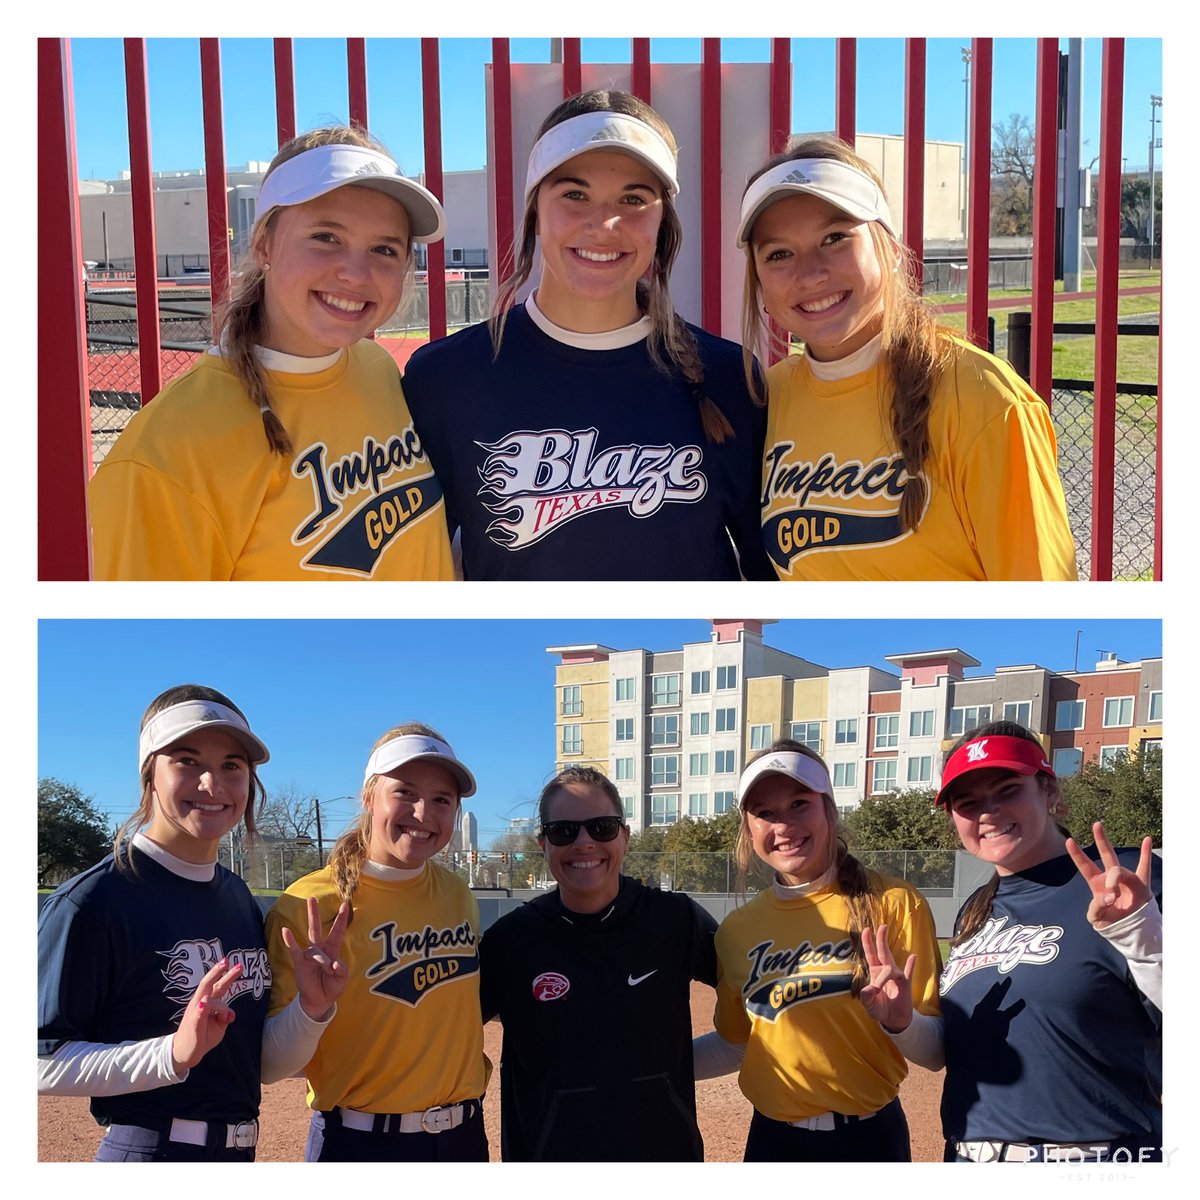 Had a blast at the U of H camp yesterday! Thank you @Coach_Ves, @nadiataylor88, @hopetraut, and all Lady Cougars who helped out with camp! Also got to see some familiar faces!🫶🏼 Go Coogs!!❤️🥎 @jazzvesely @raydvaughn @ImpactGoldOrg @IGVaughn16u